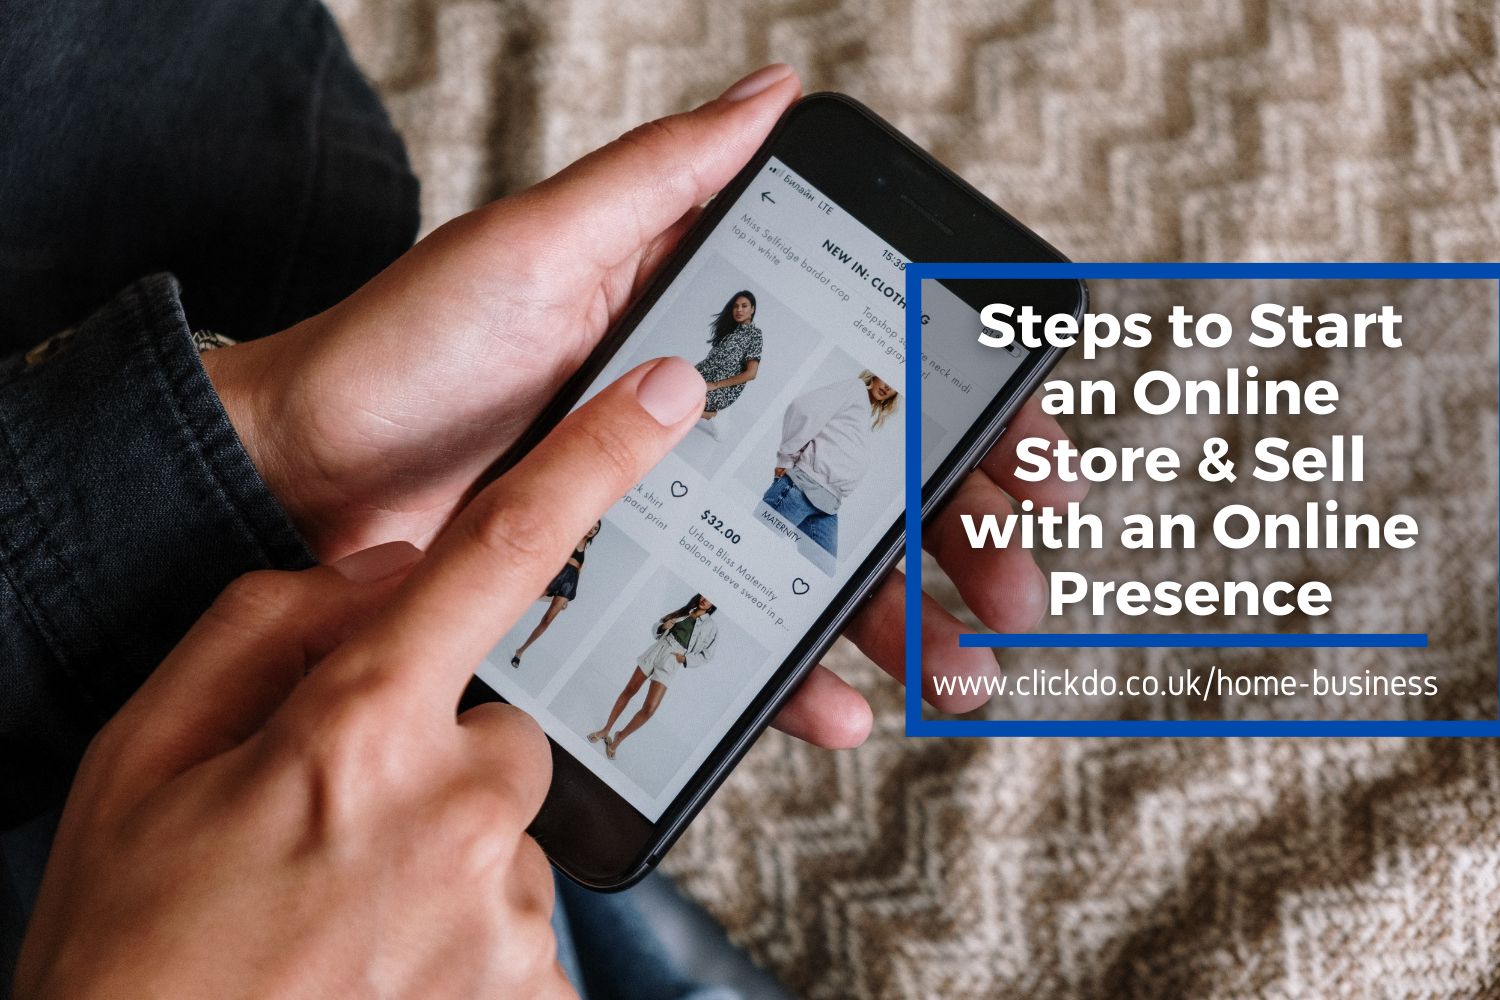 steps-to-start-an-online-store--sell-with-an-online-presence